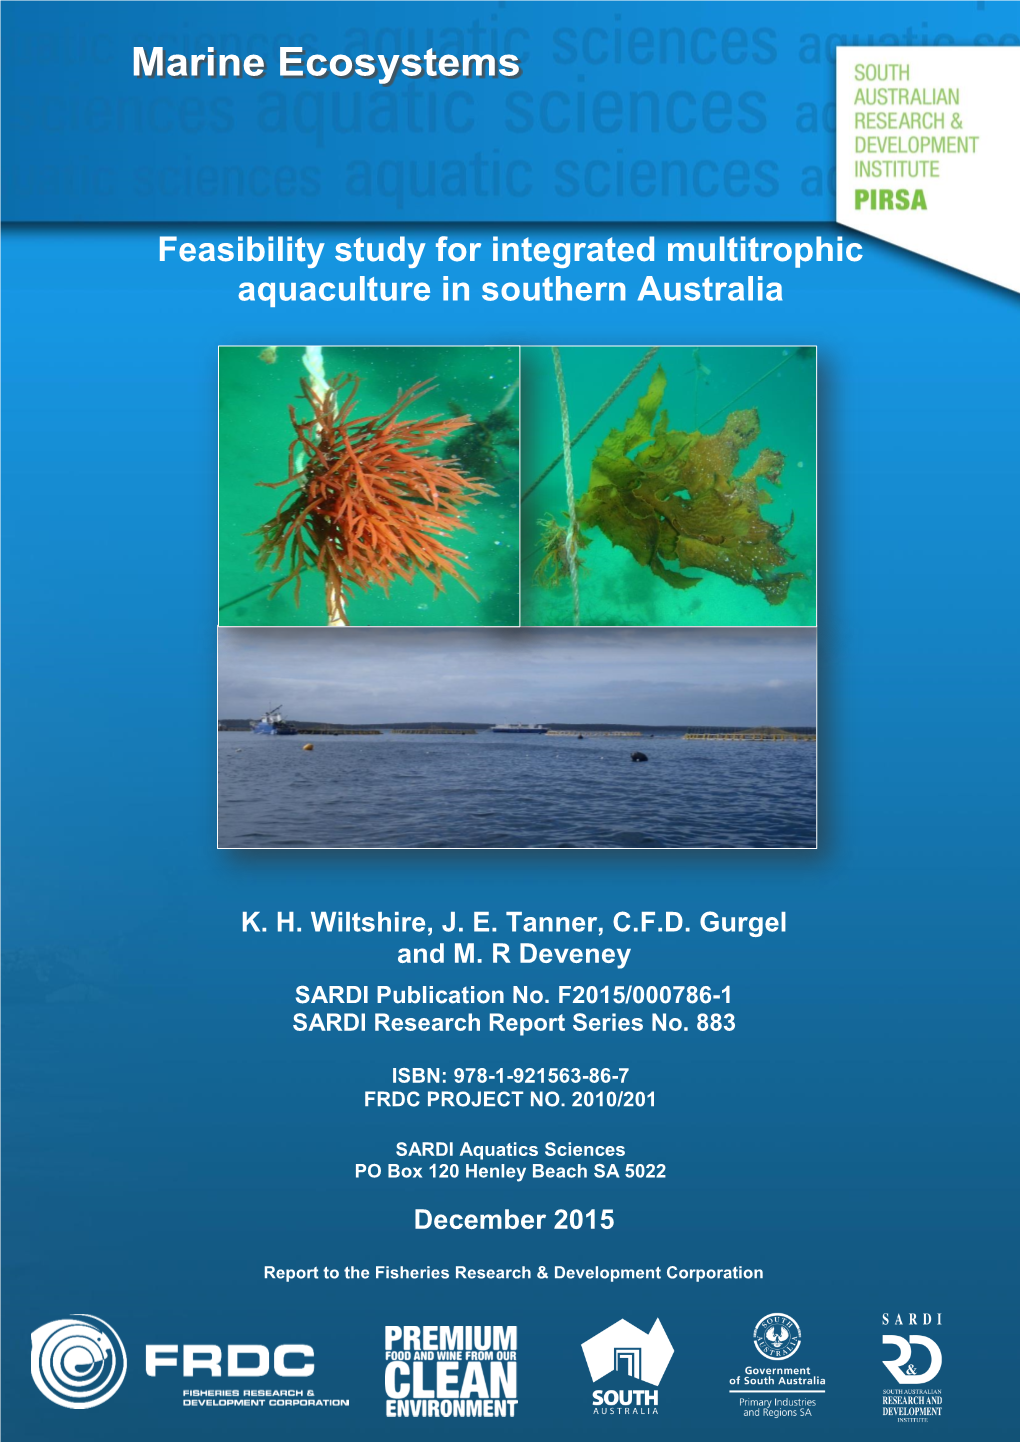 Feasibility Study for Integrated Multitrophic Aquaculture in Southern Australia